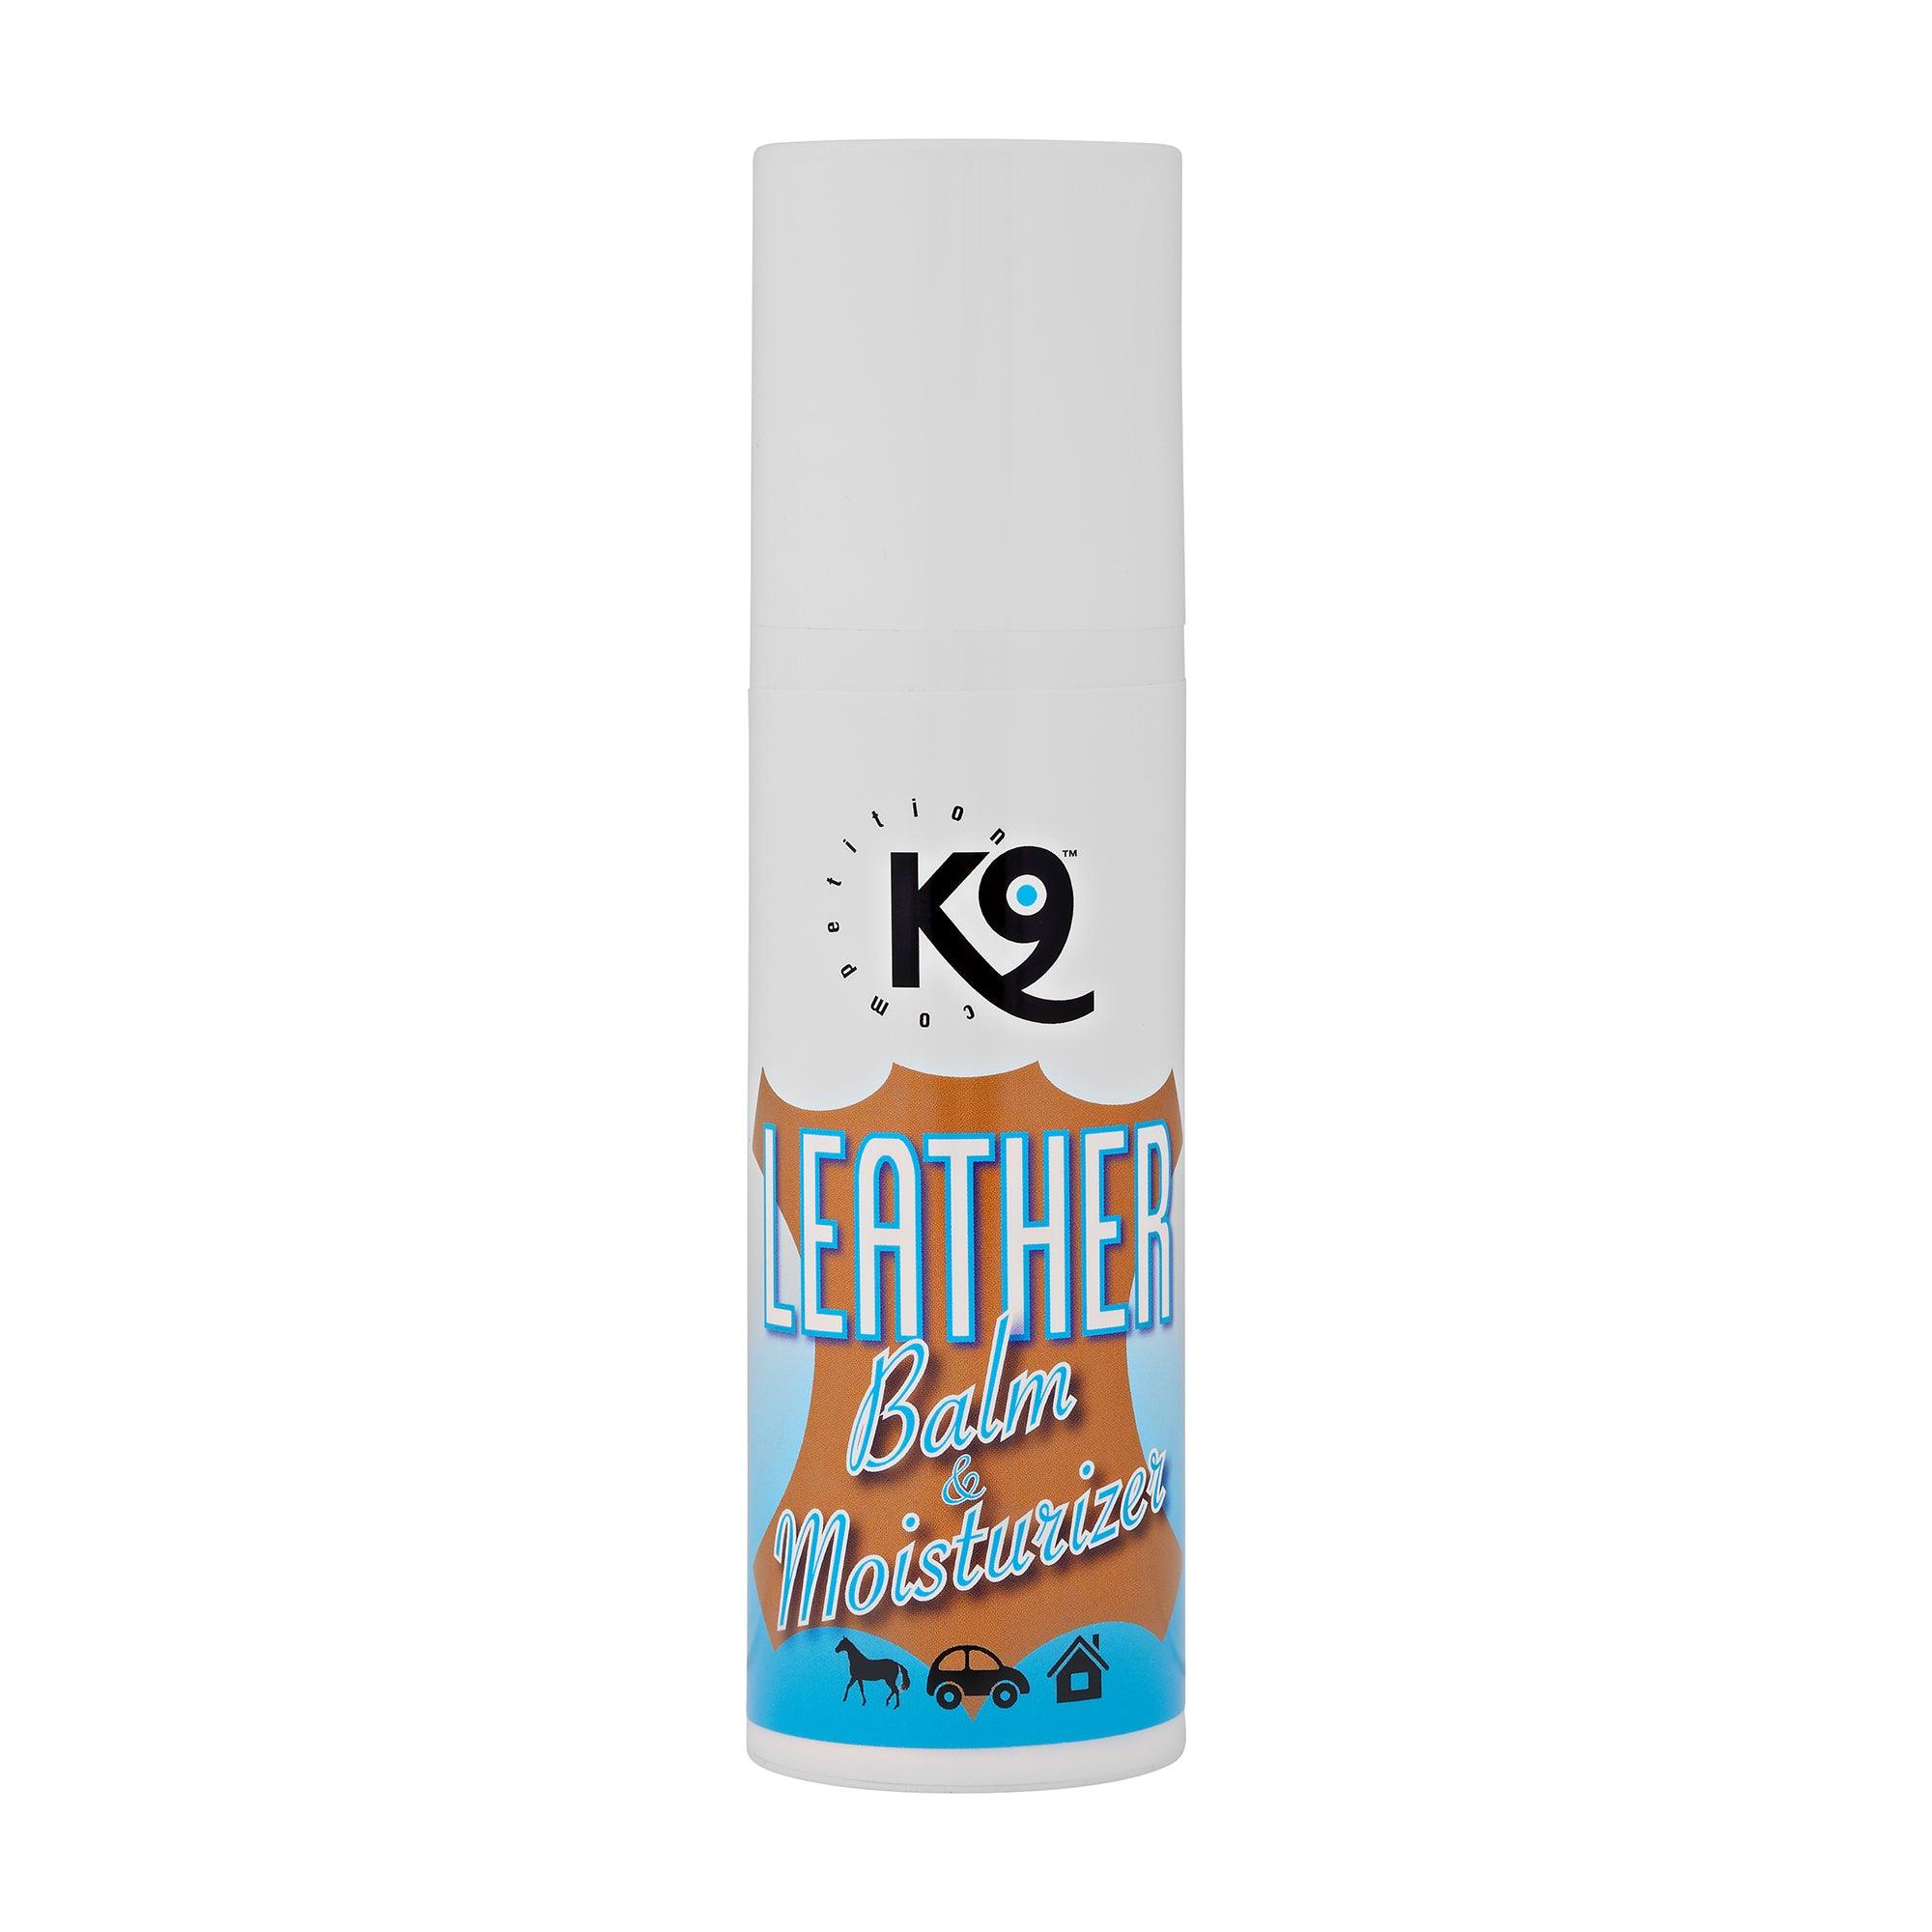 K9 Leather Balm - K9 Competition